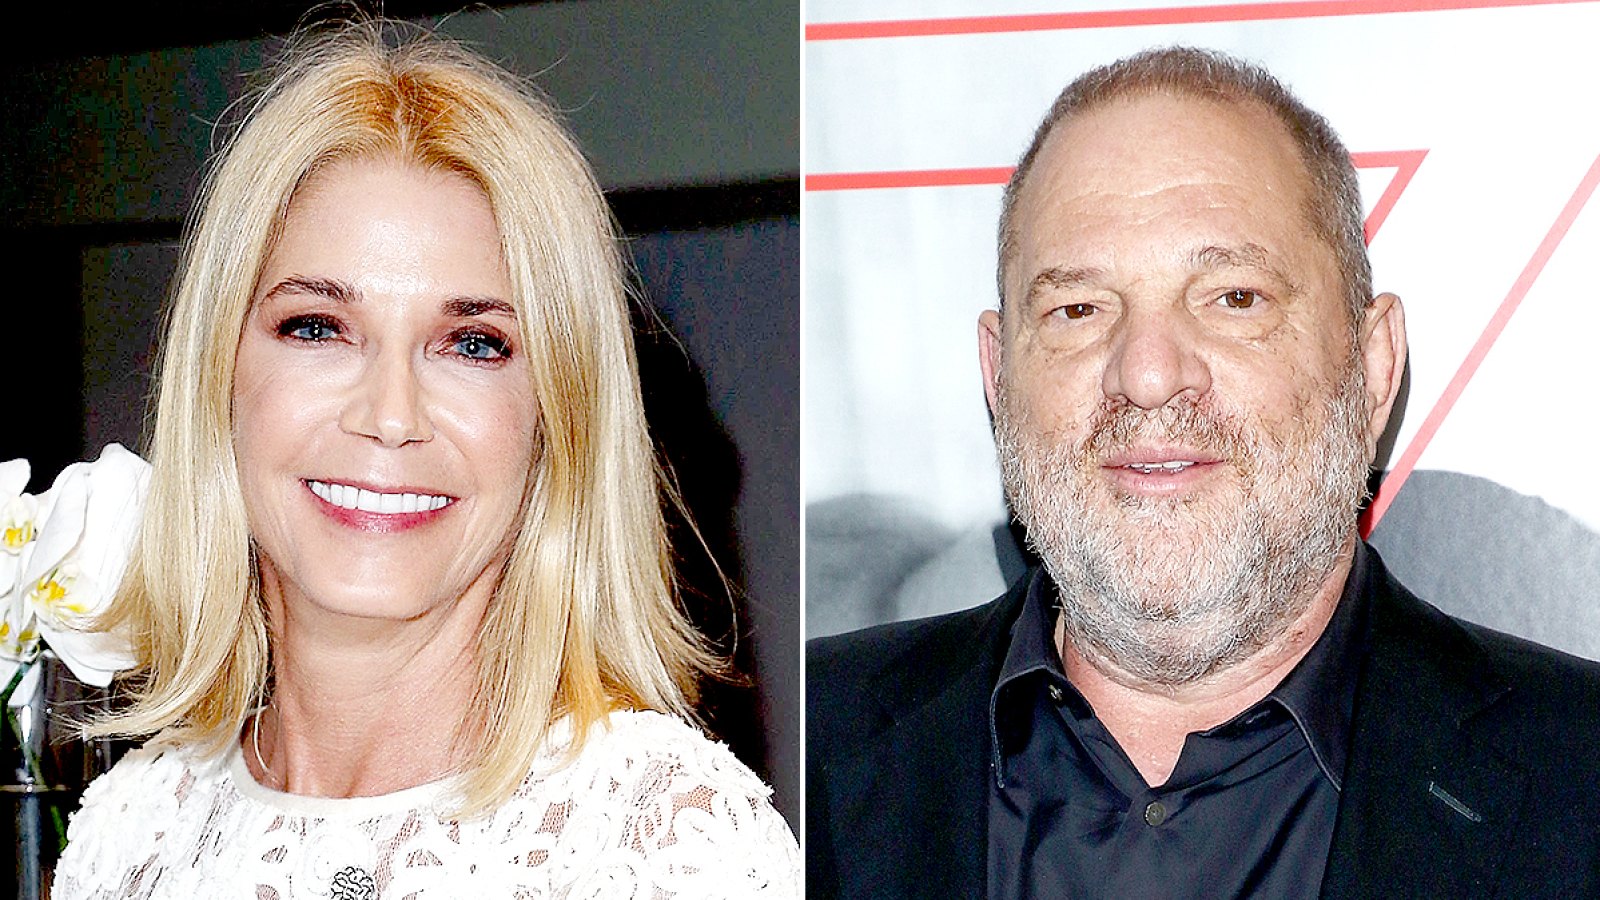 Candace Bushnell and Harvey Weinstein